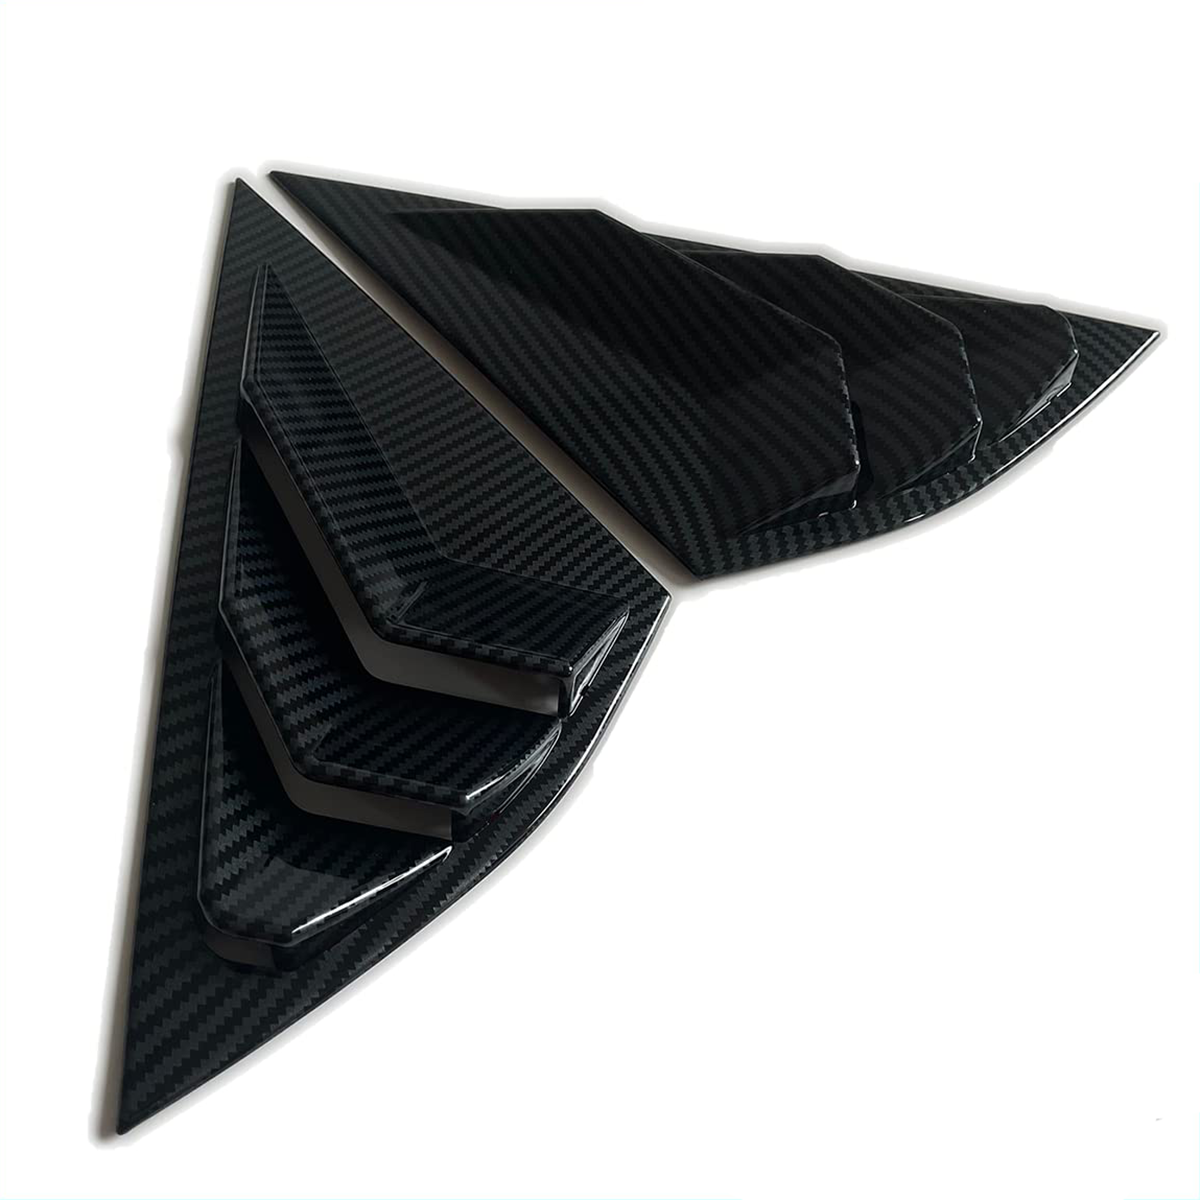 Mach E Window Scoop Louvers Cover from AOSK